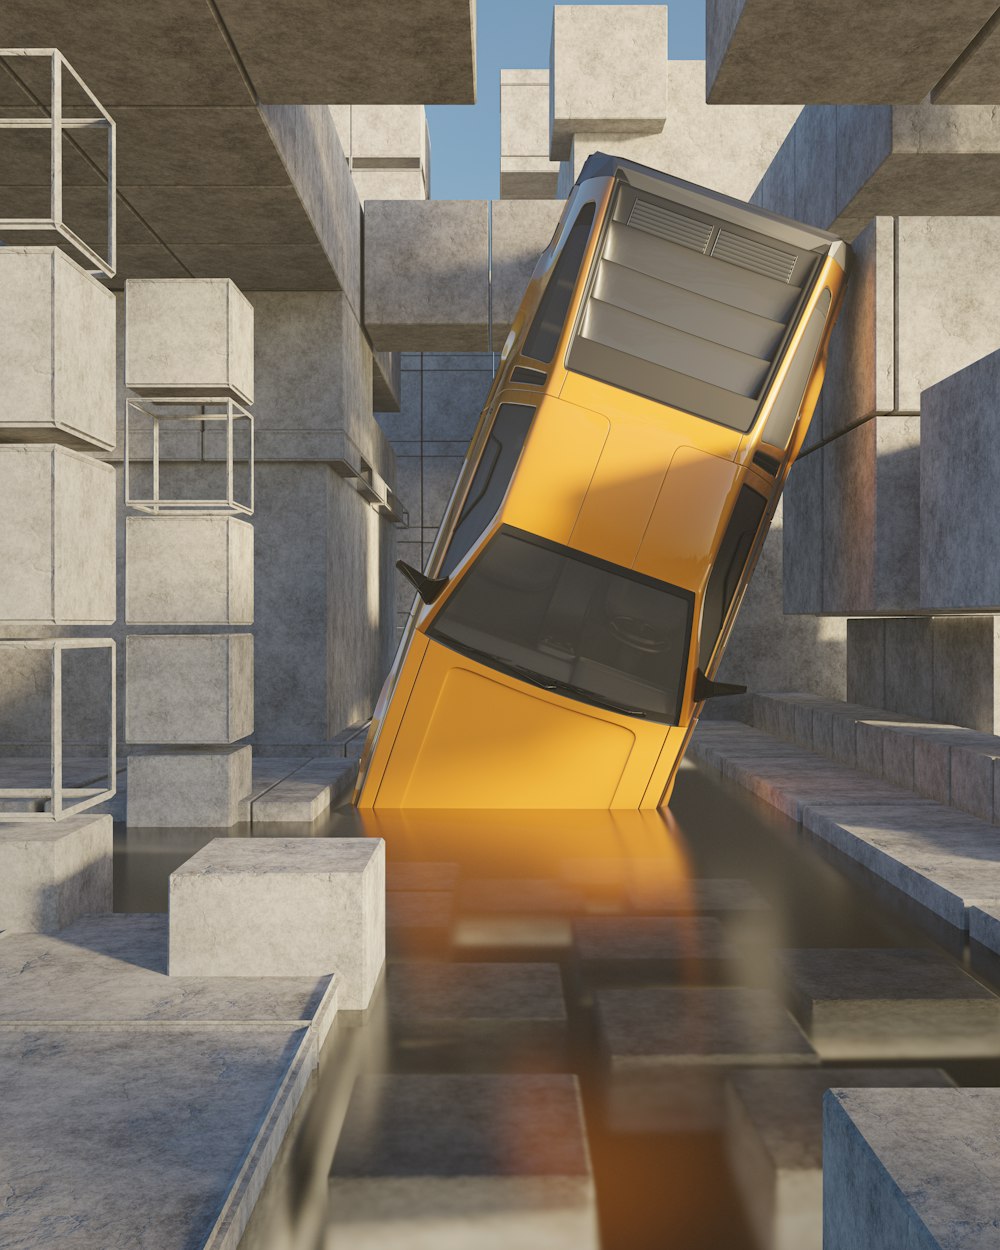 a car that is upside down in a building